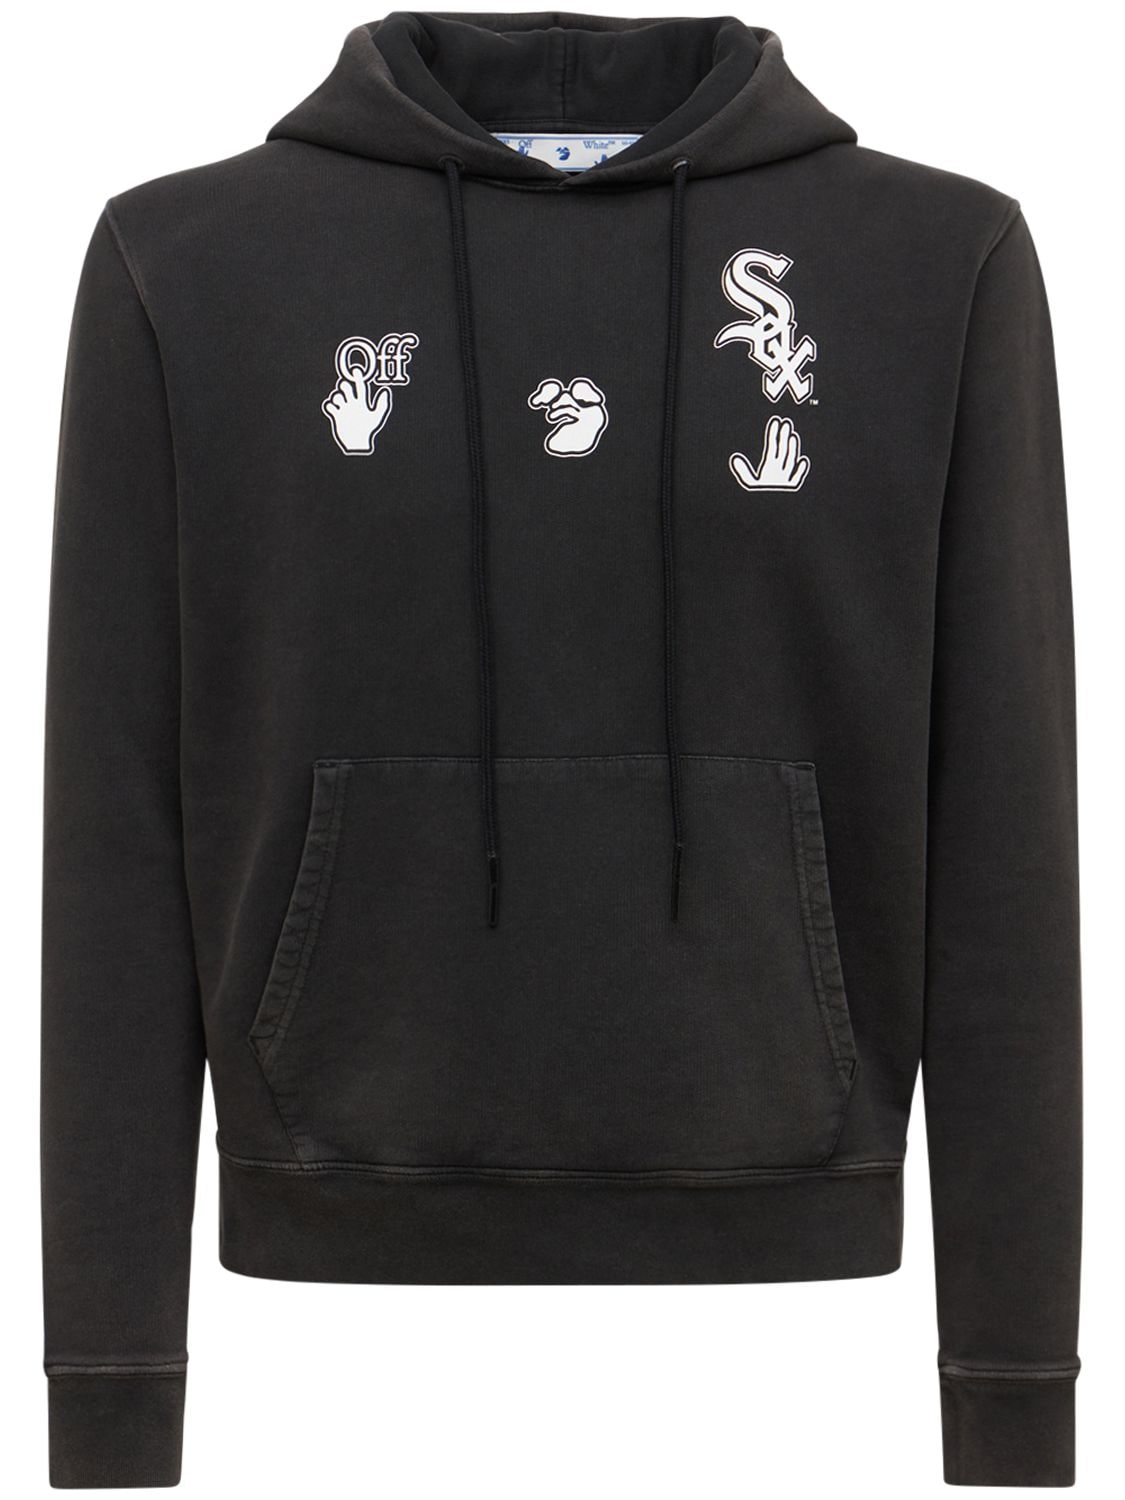 MLB Team Apparel Youth Chicago White Sox Black Pullover Hoodie